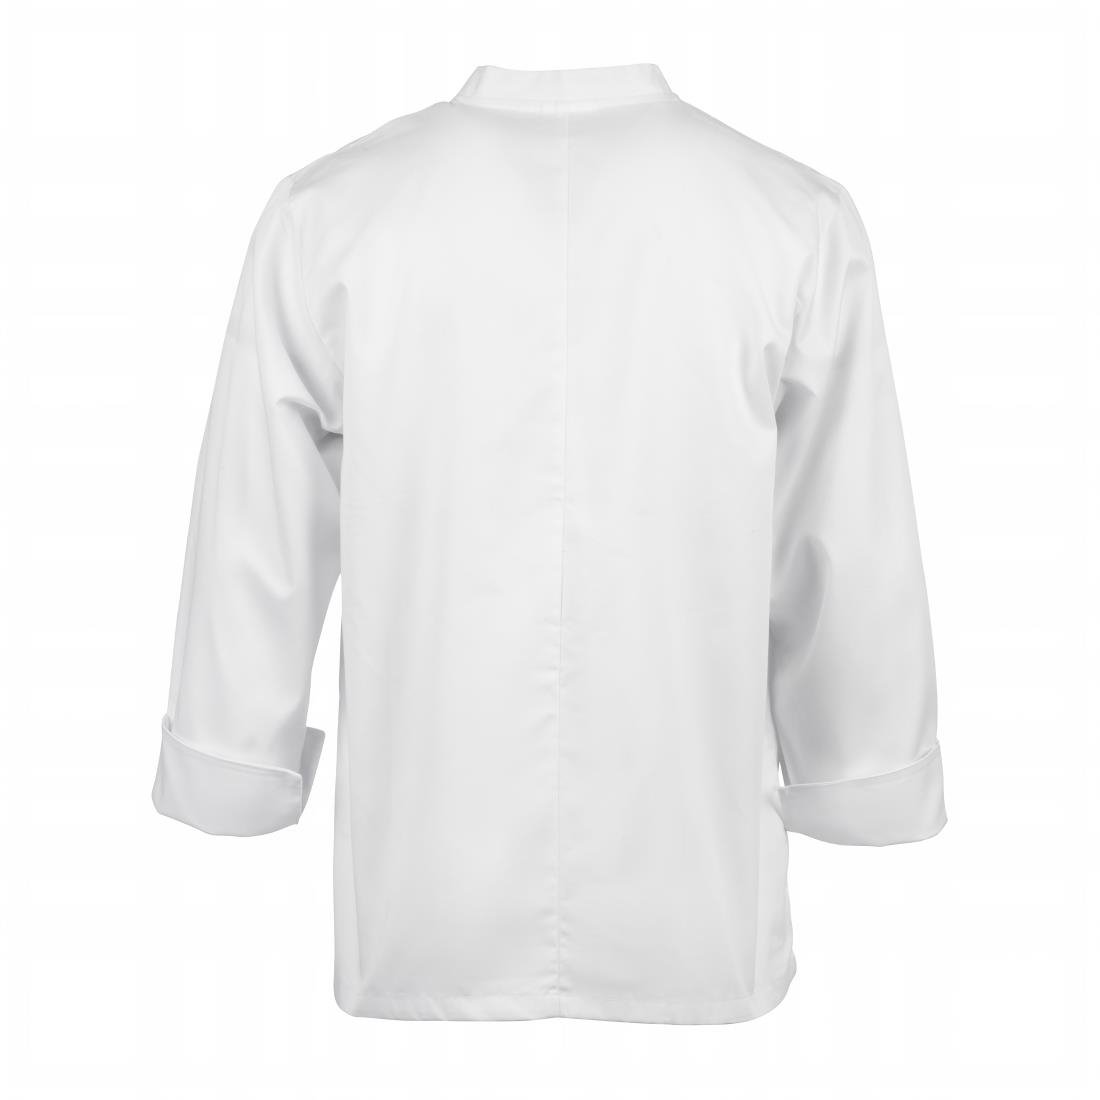 A371-7XL Chef Works Le Mans Chefs Jacket White 7XL JD Catering Equipment Solutions Ltd